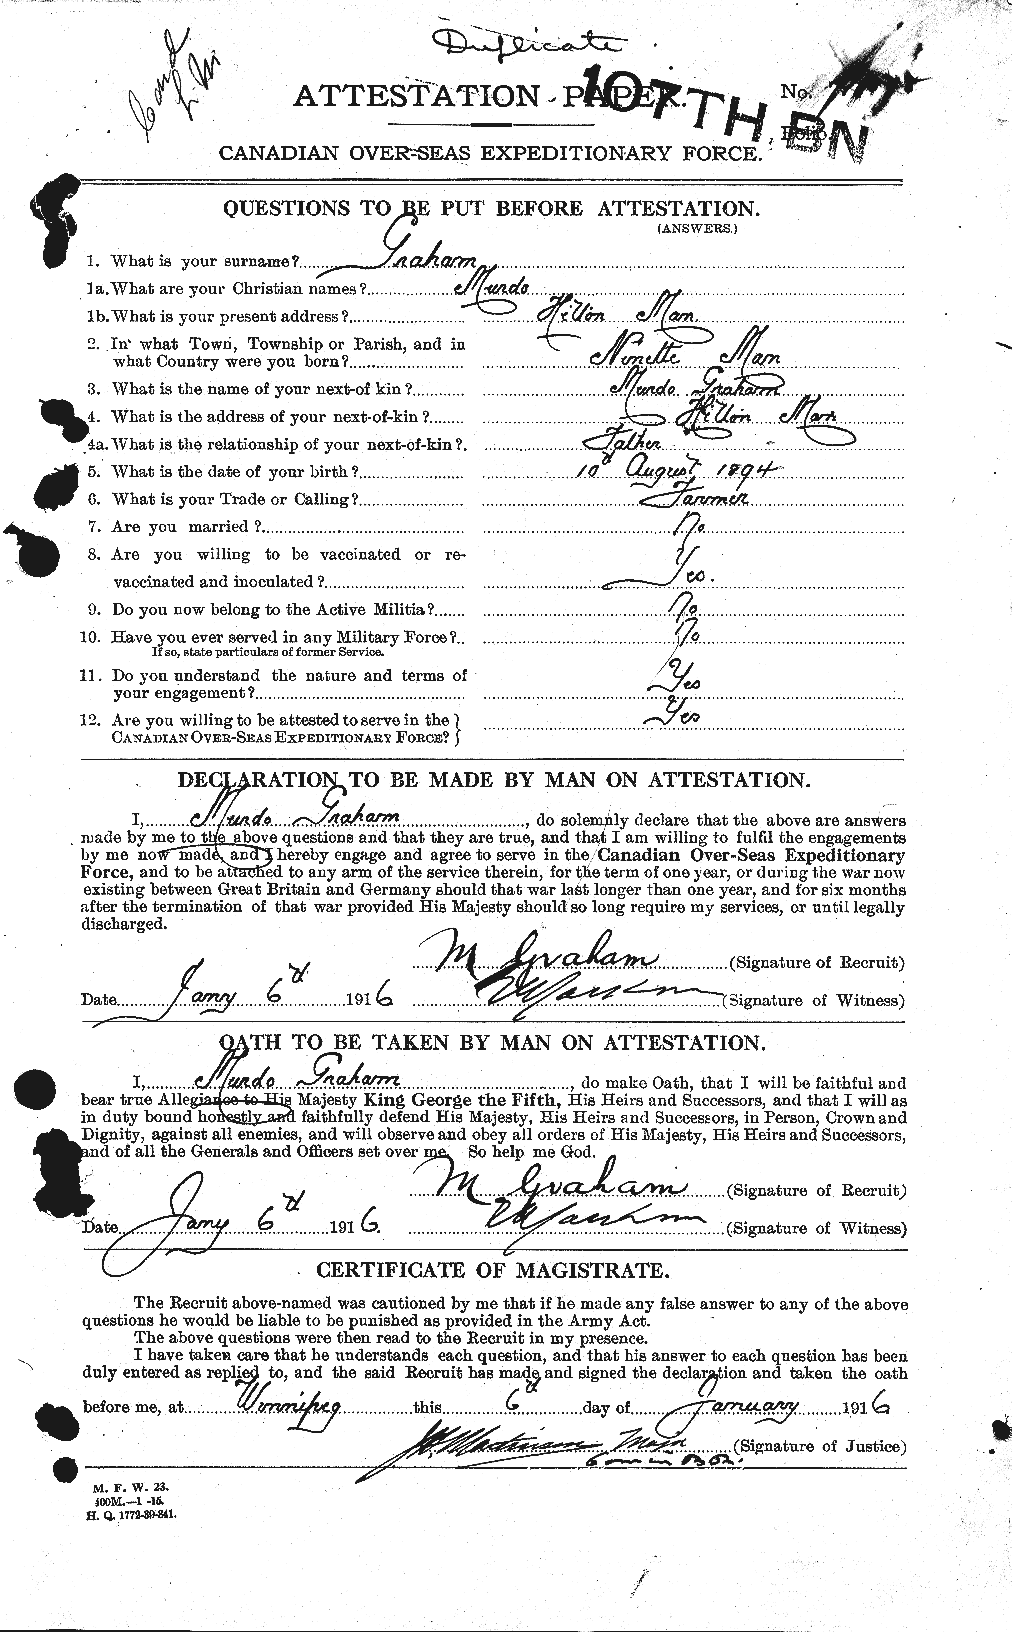 Personnel Records of the First World War - CEF 359312a